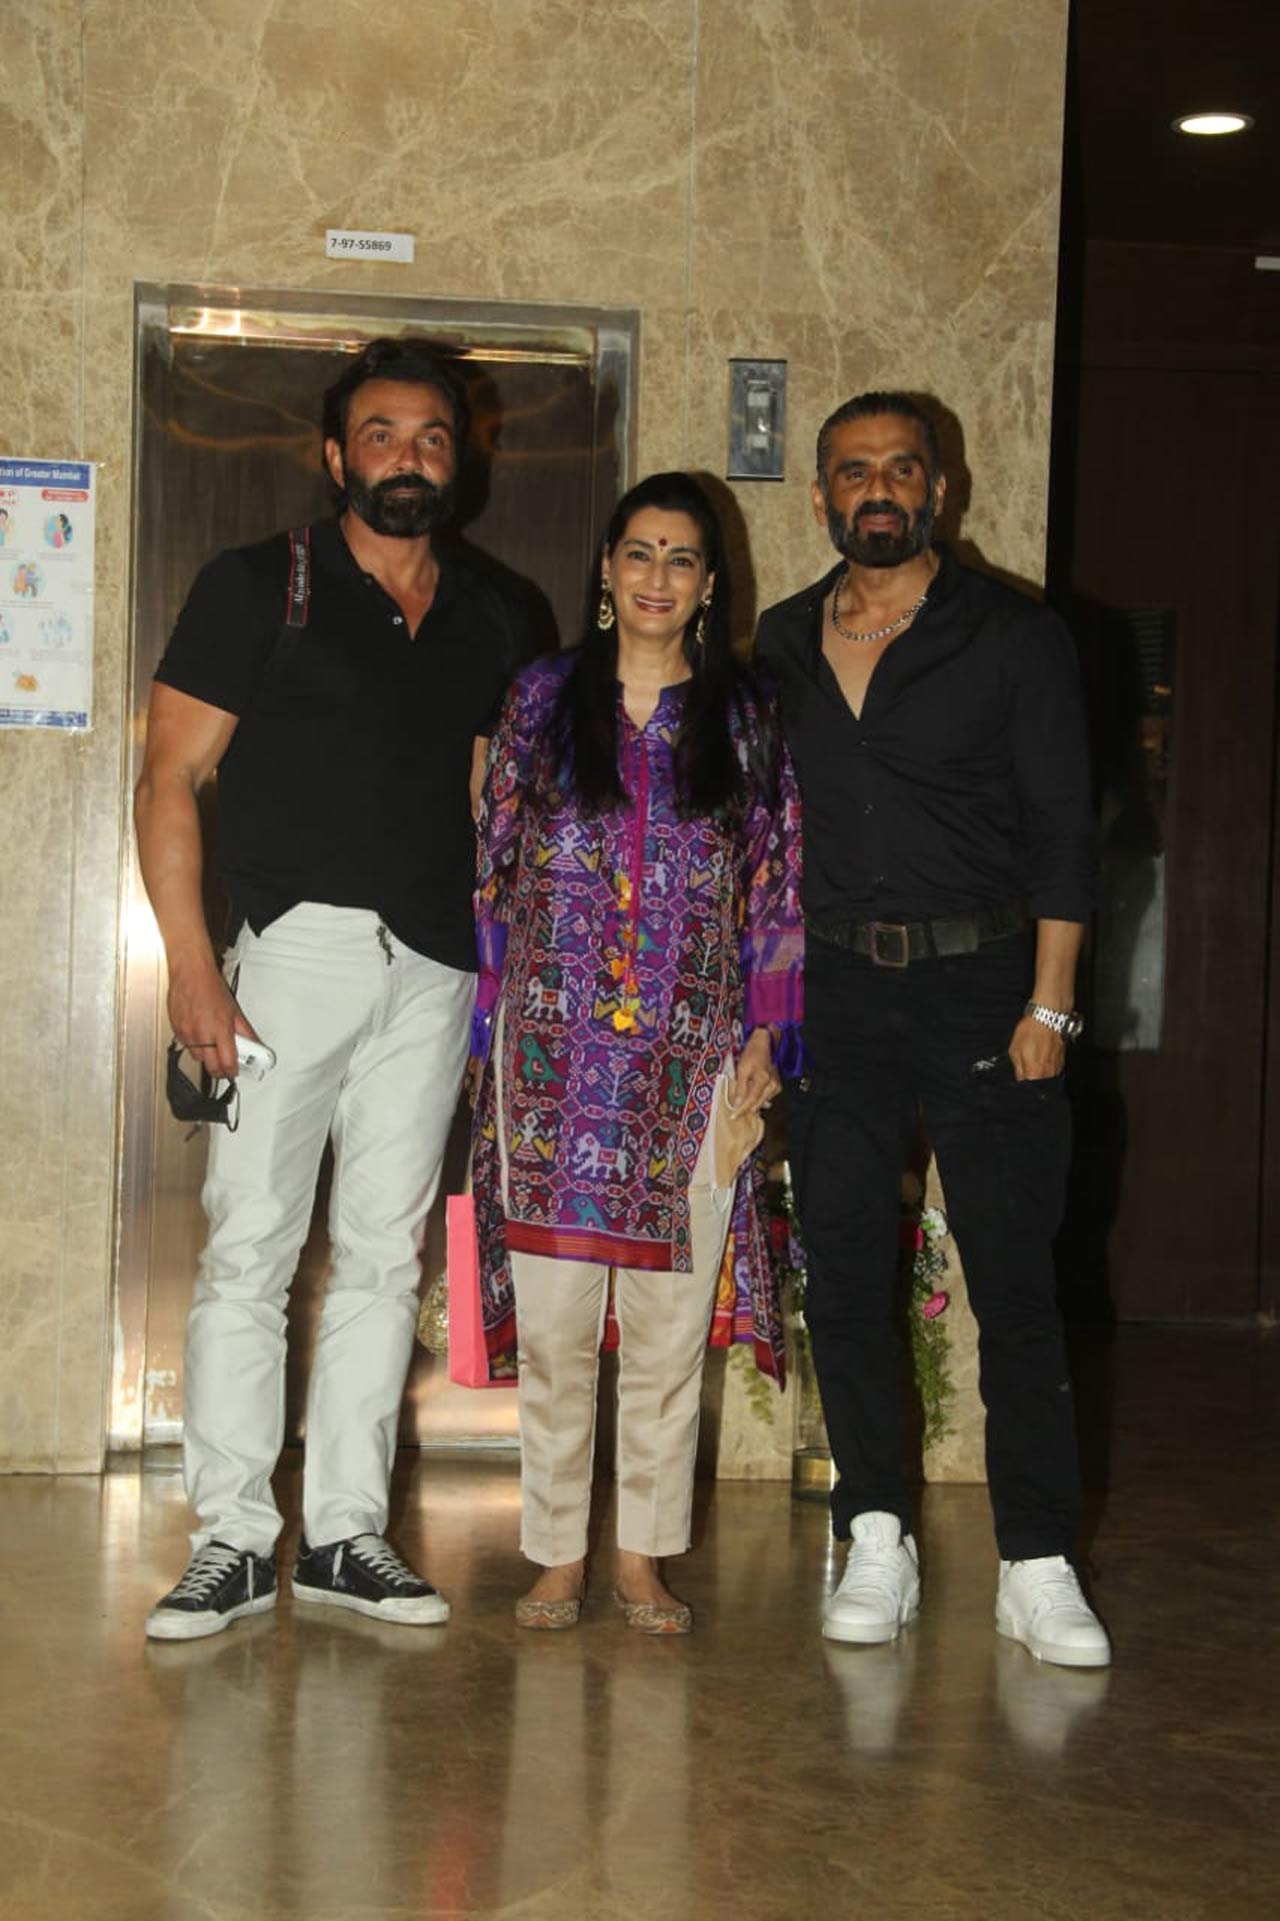 The festival of lights saw a reunion of Bobby Deol and Suniel Shetty, the popular actors of the 90s. The Bollywood duo was accompanied by Suniel Shetty's wife Mana as they posed for the shutterbugs.